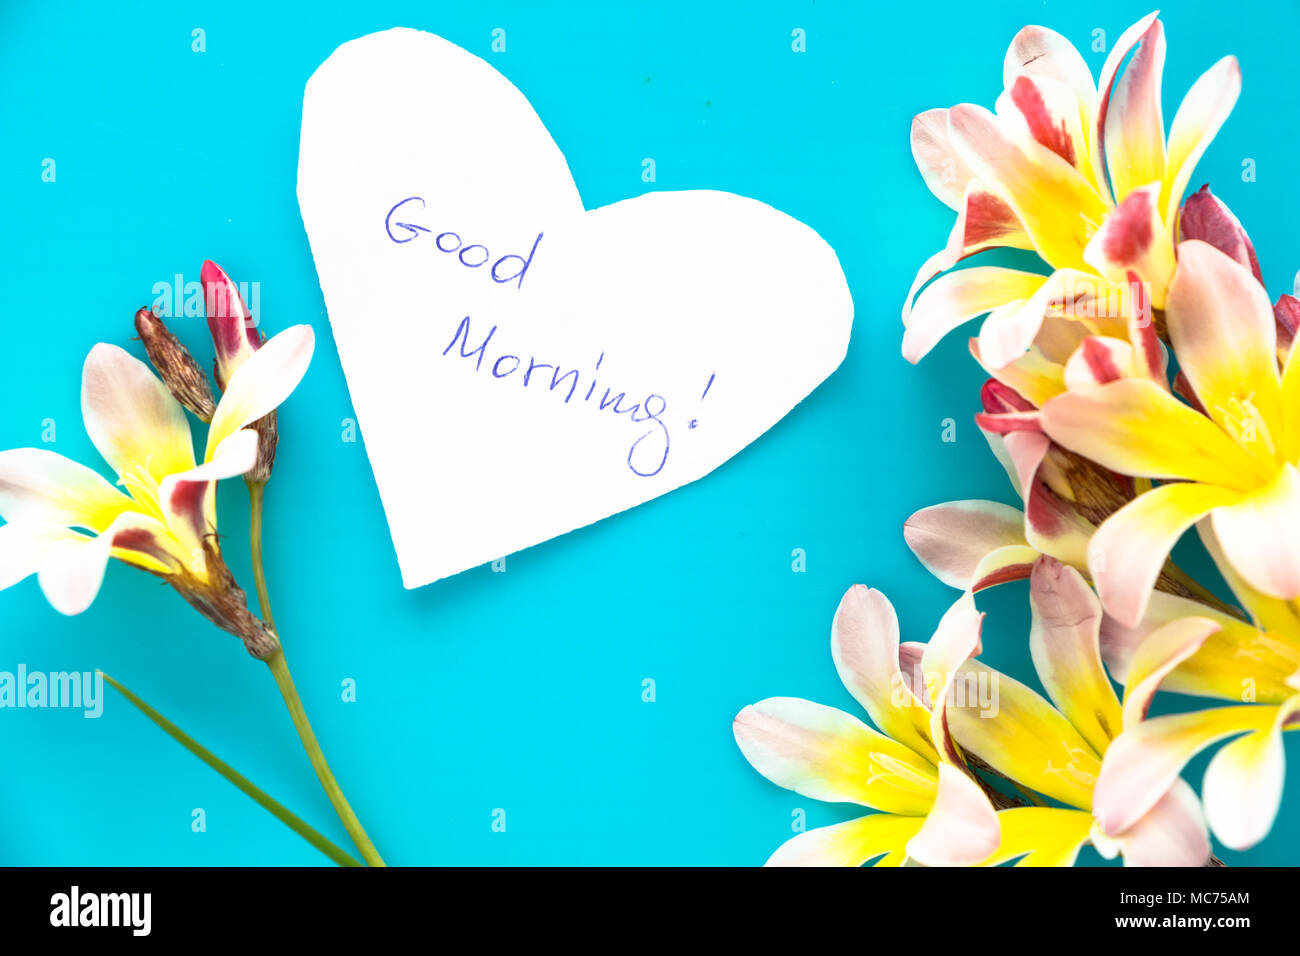 Note in shape of heart with words Good Morning, with flowers on blue surface. Stock Photo